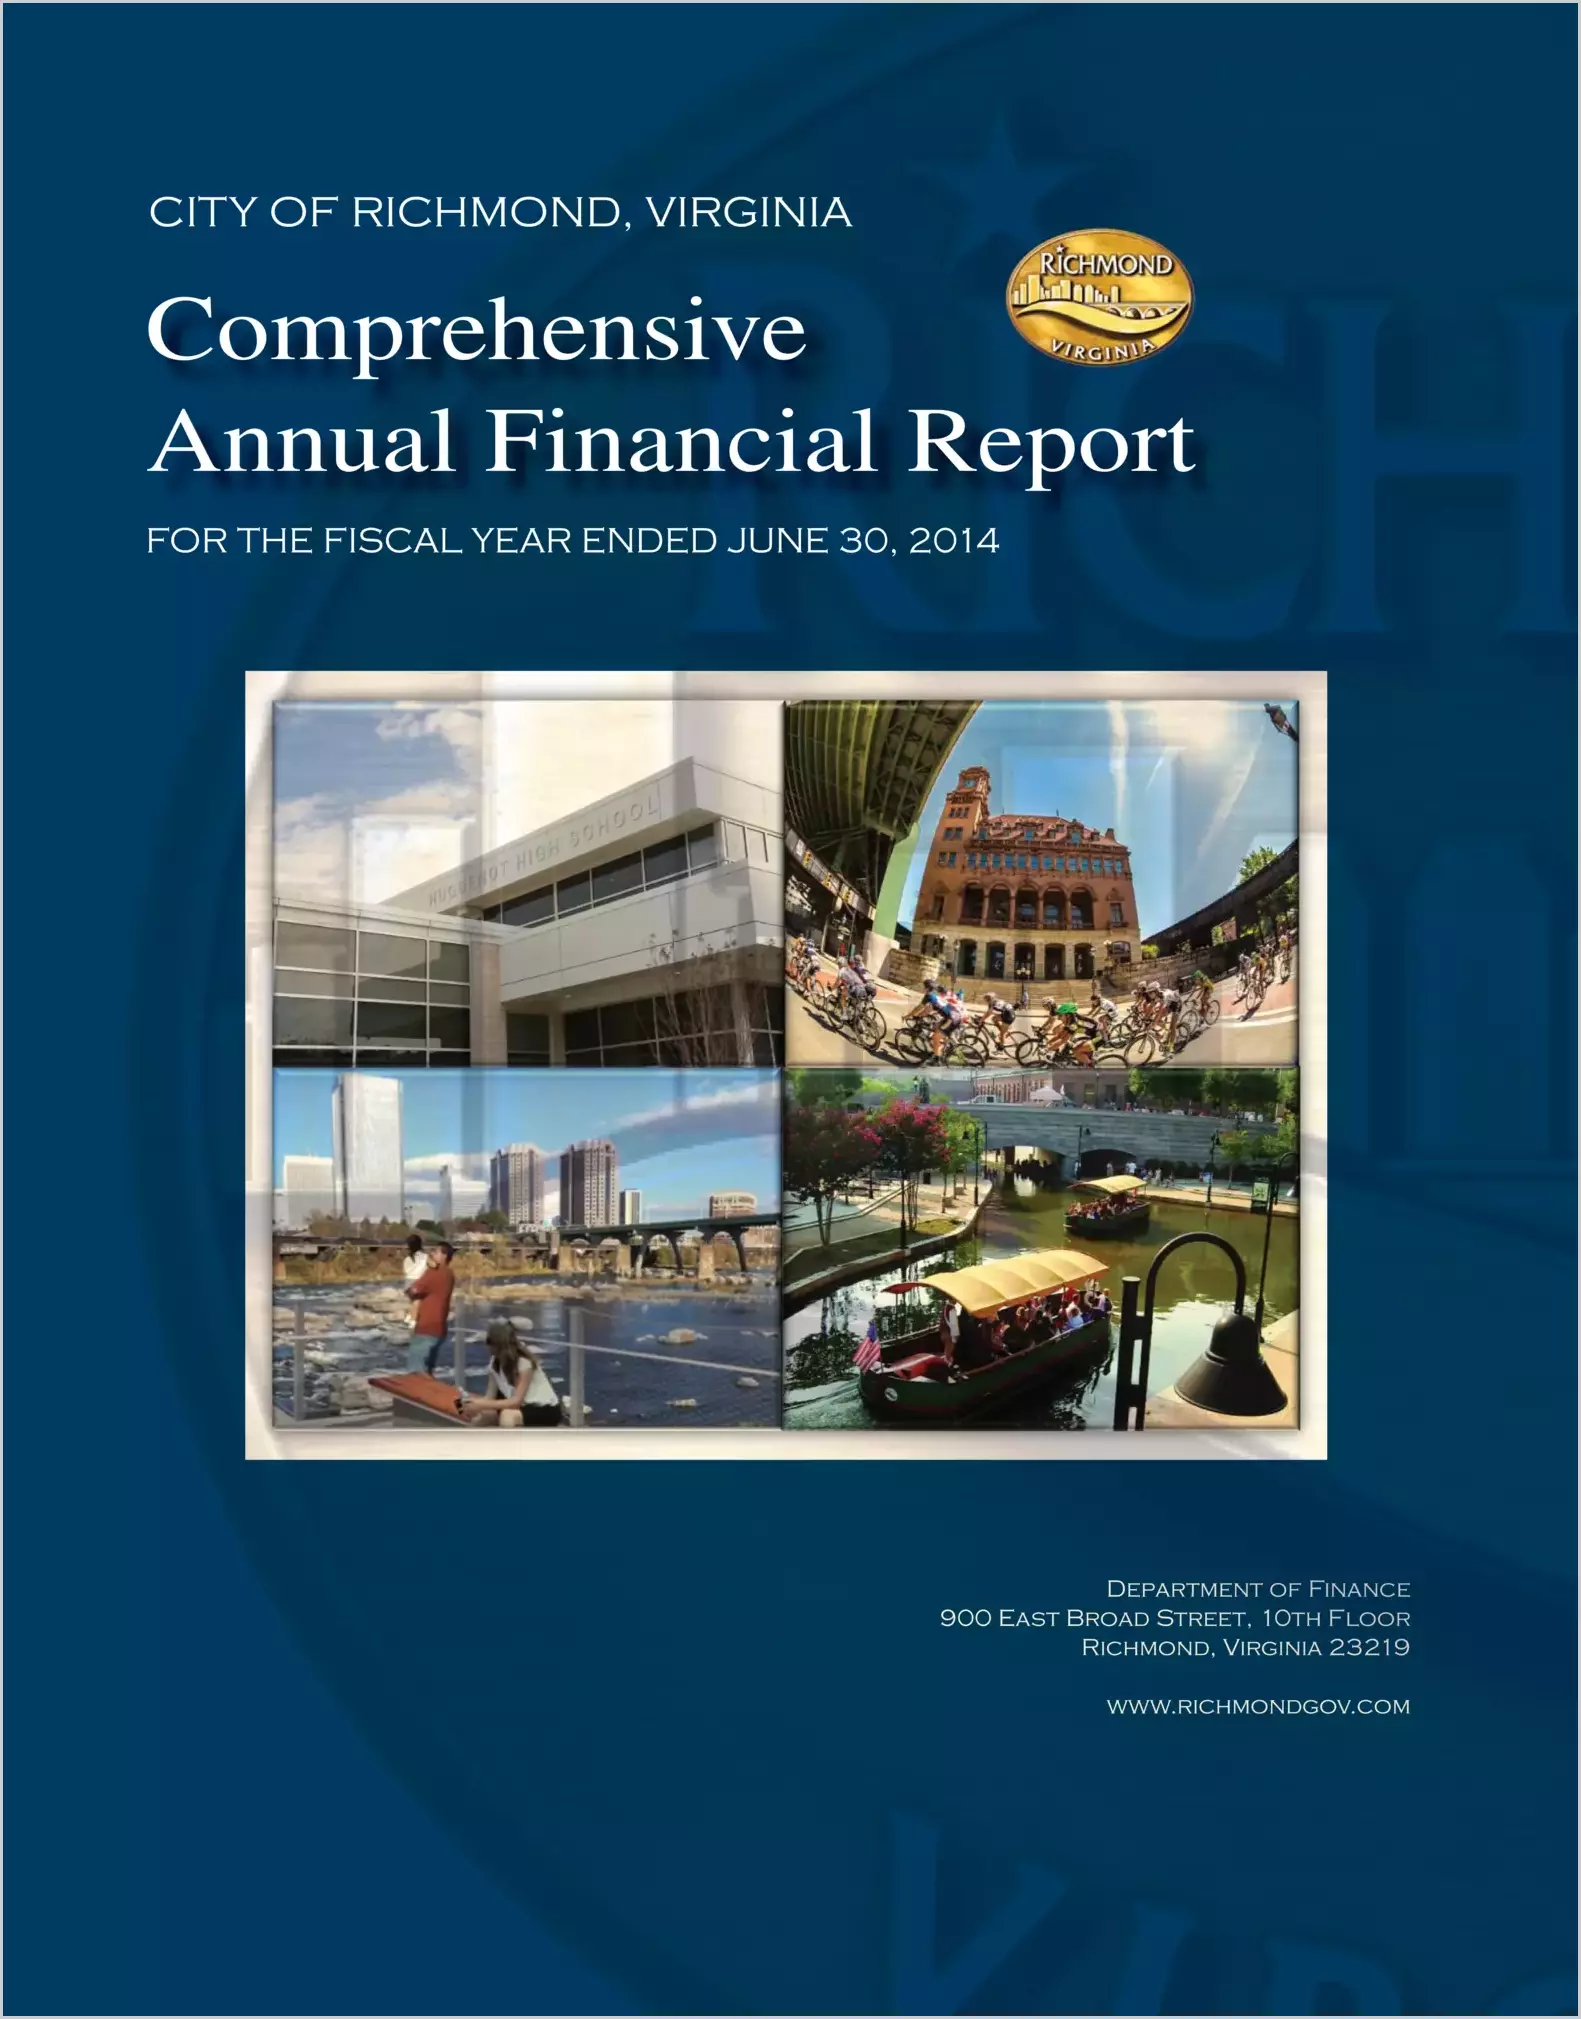 2014 Annual Financial Report for City of Richmond